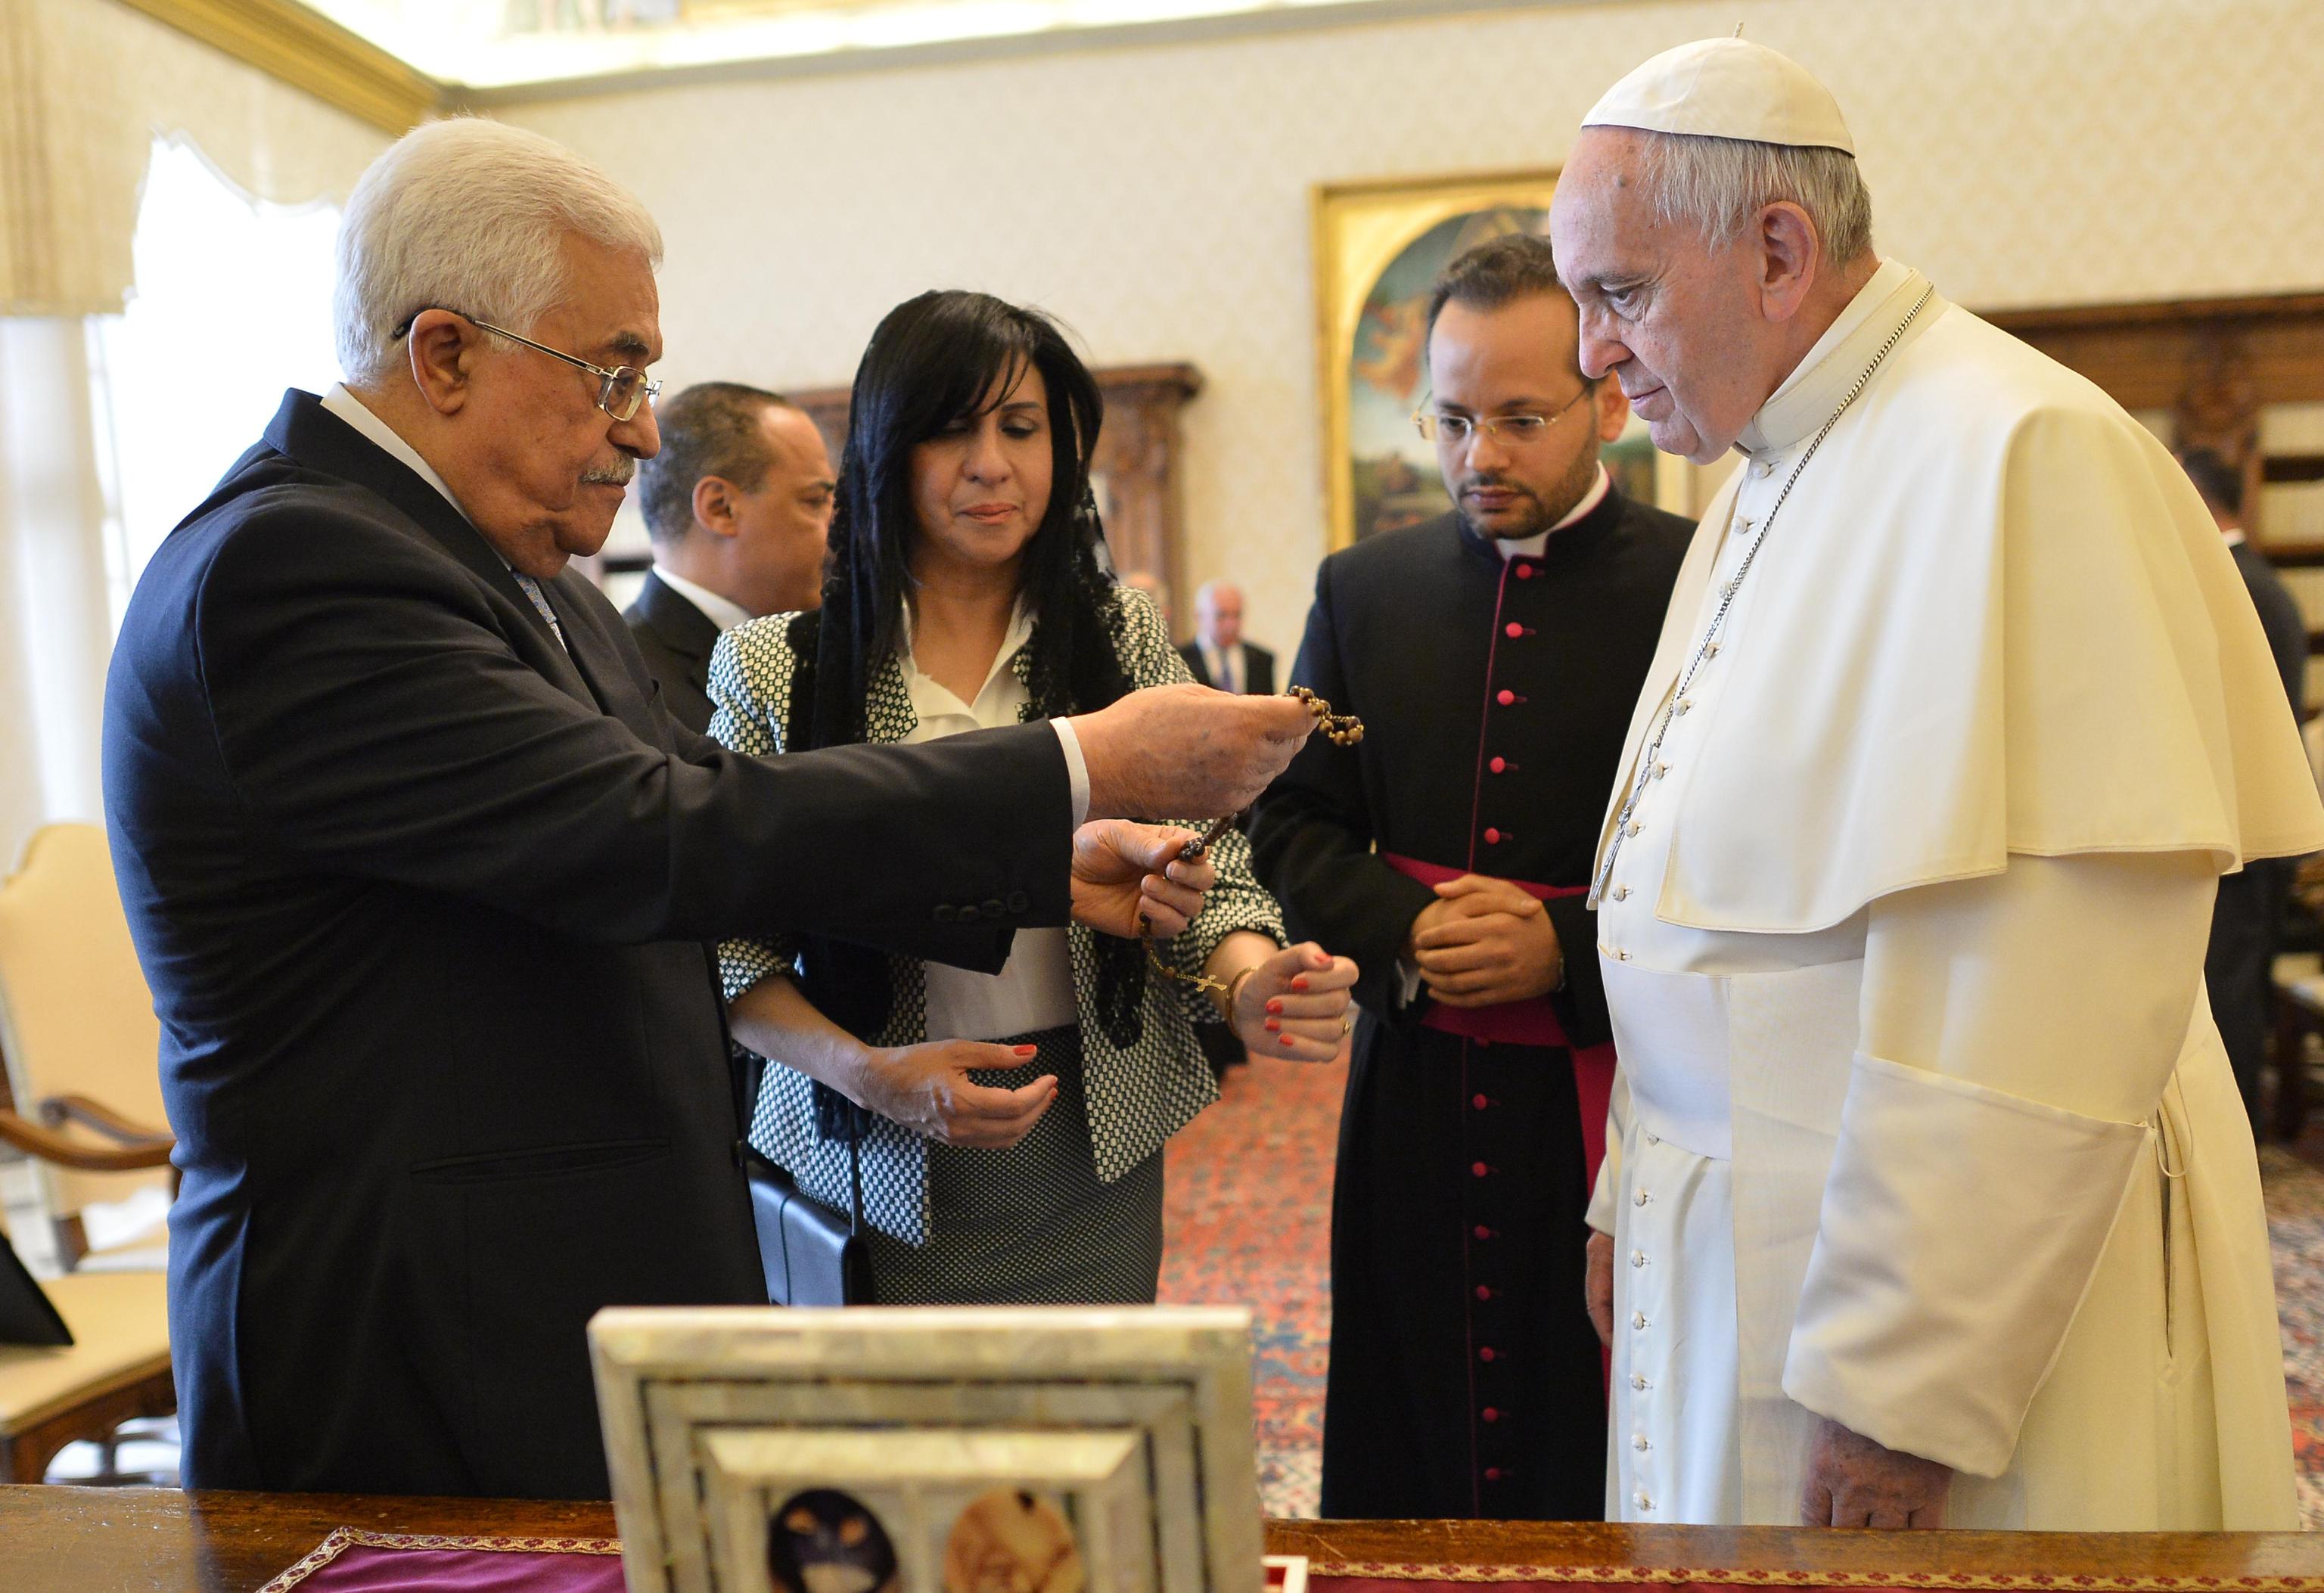 Pope Francis exchanges gifts with Palestinian authority President Mahmoud Abbas during a private audience on May 16